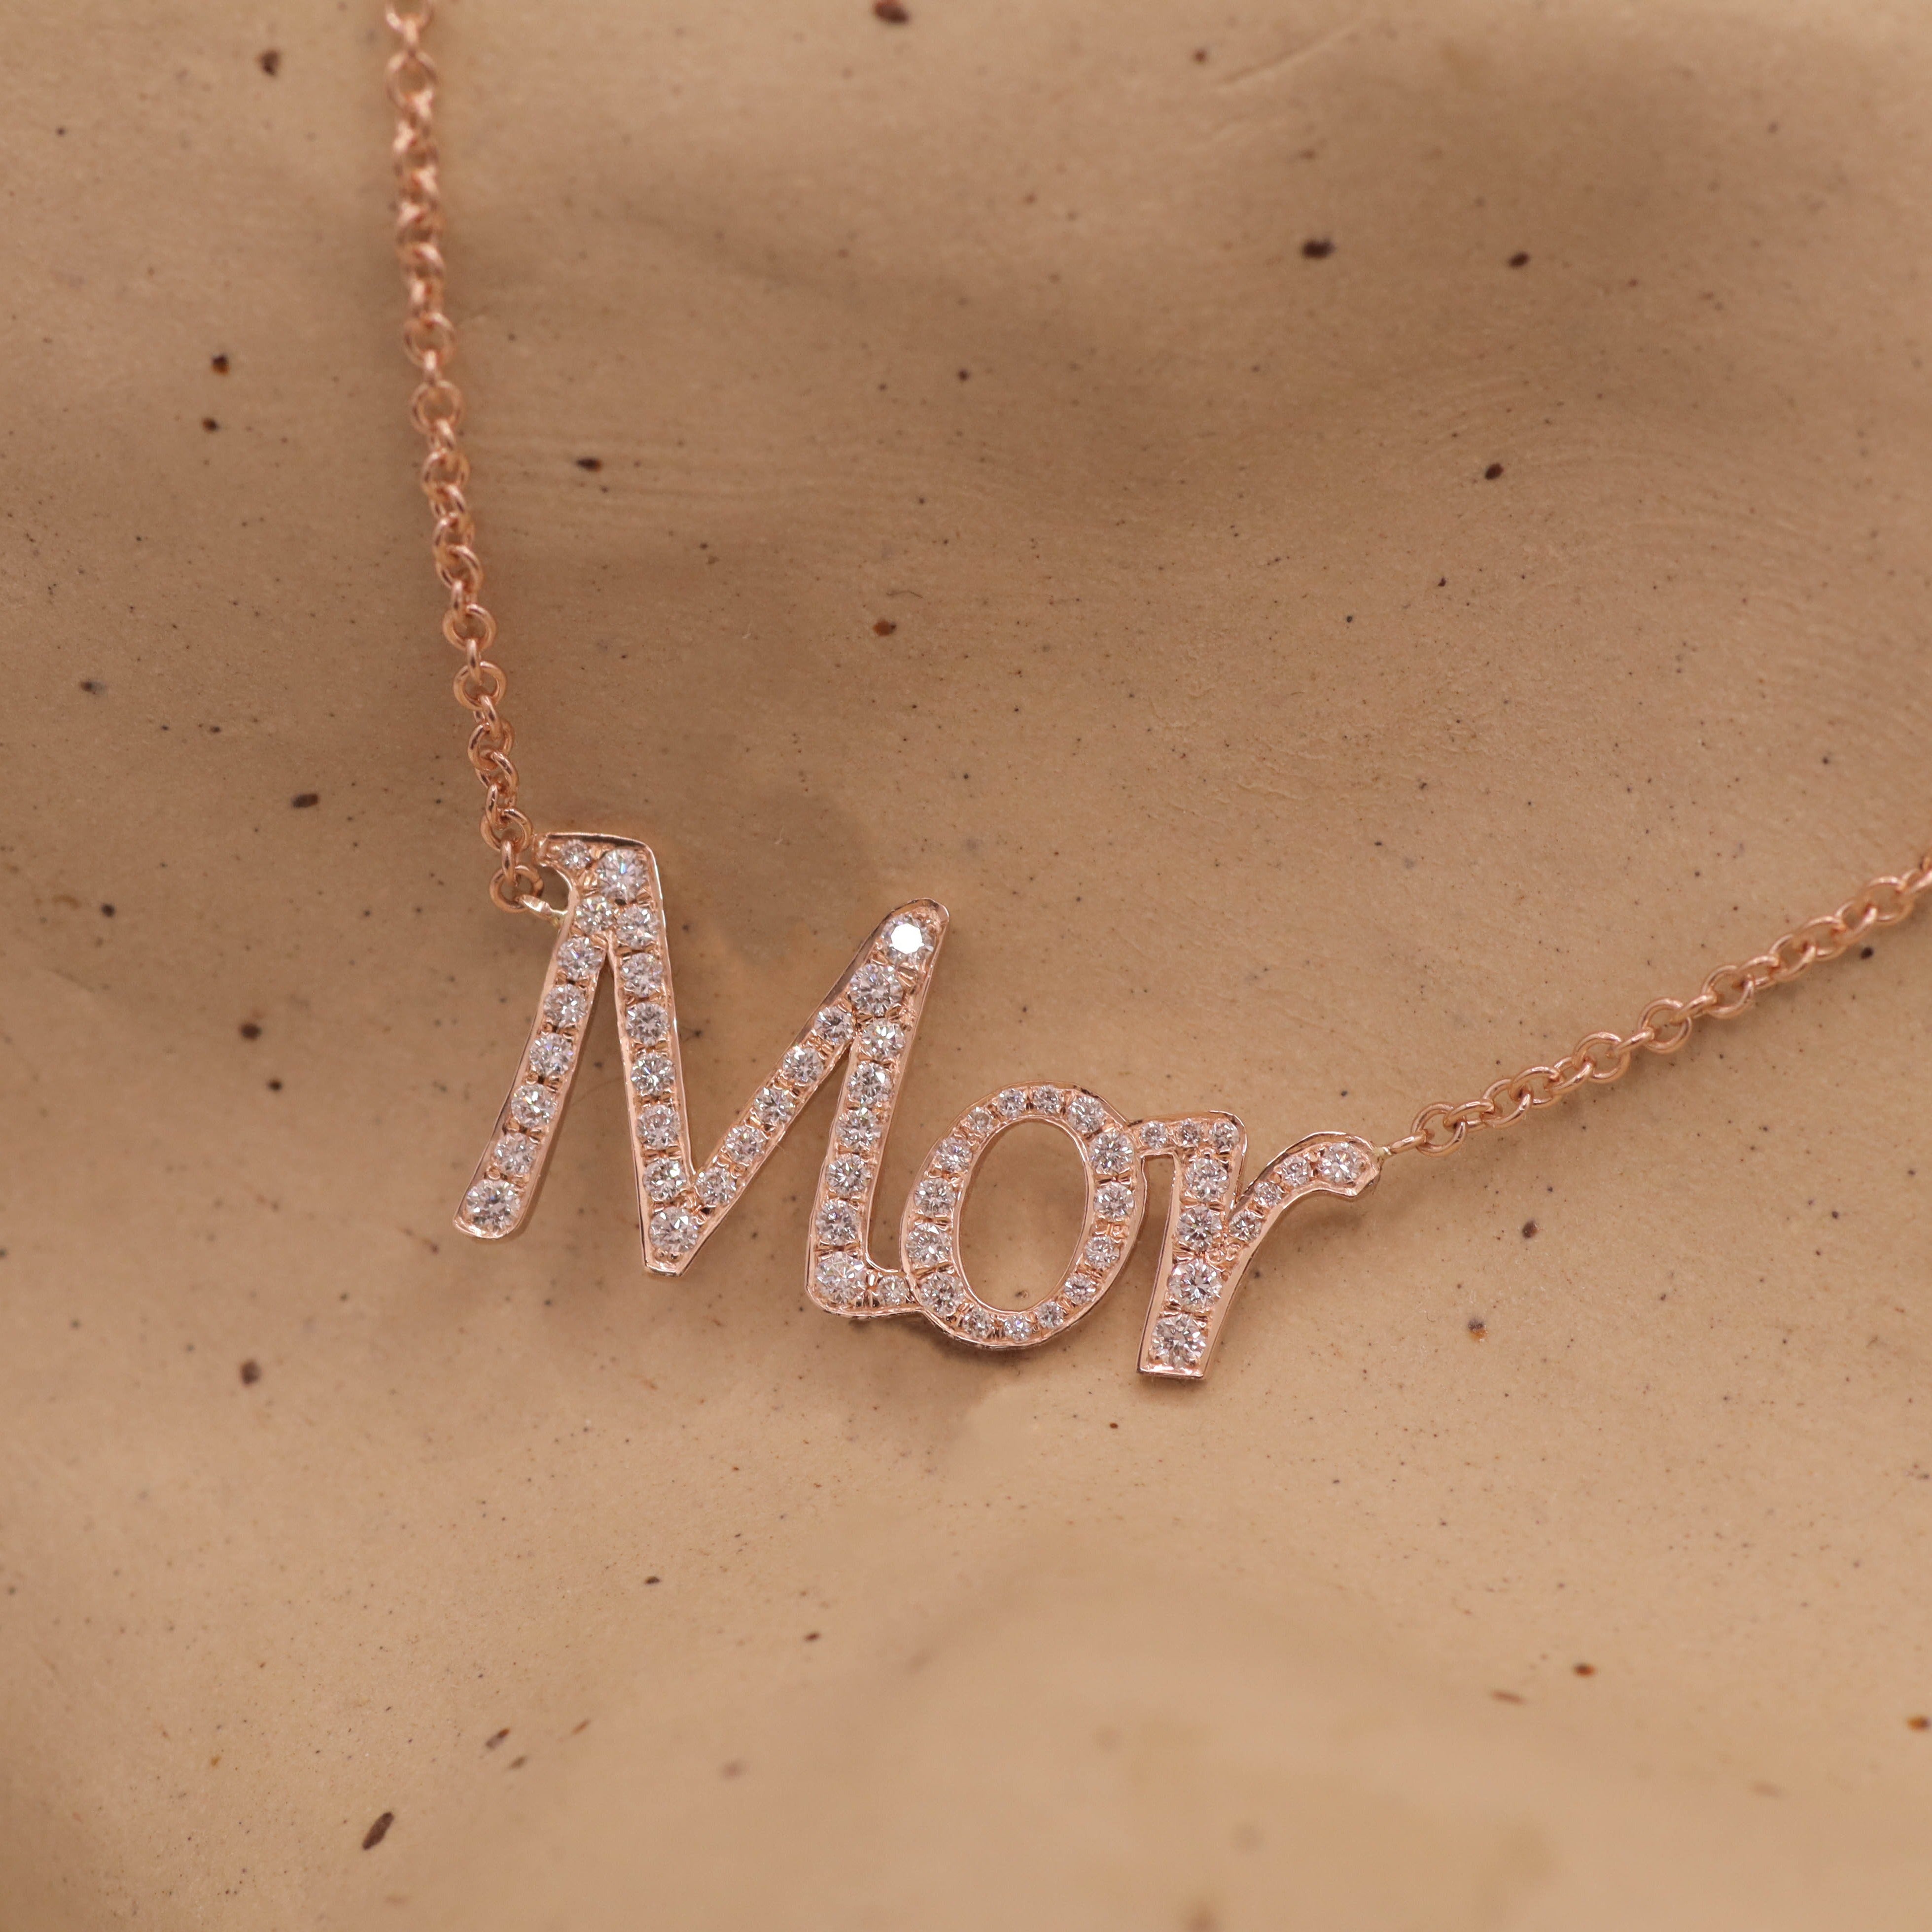 Name necklace set with diamonds